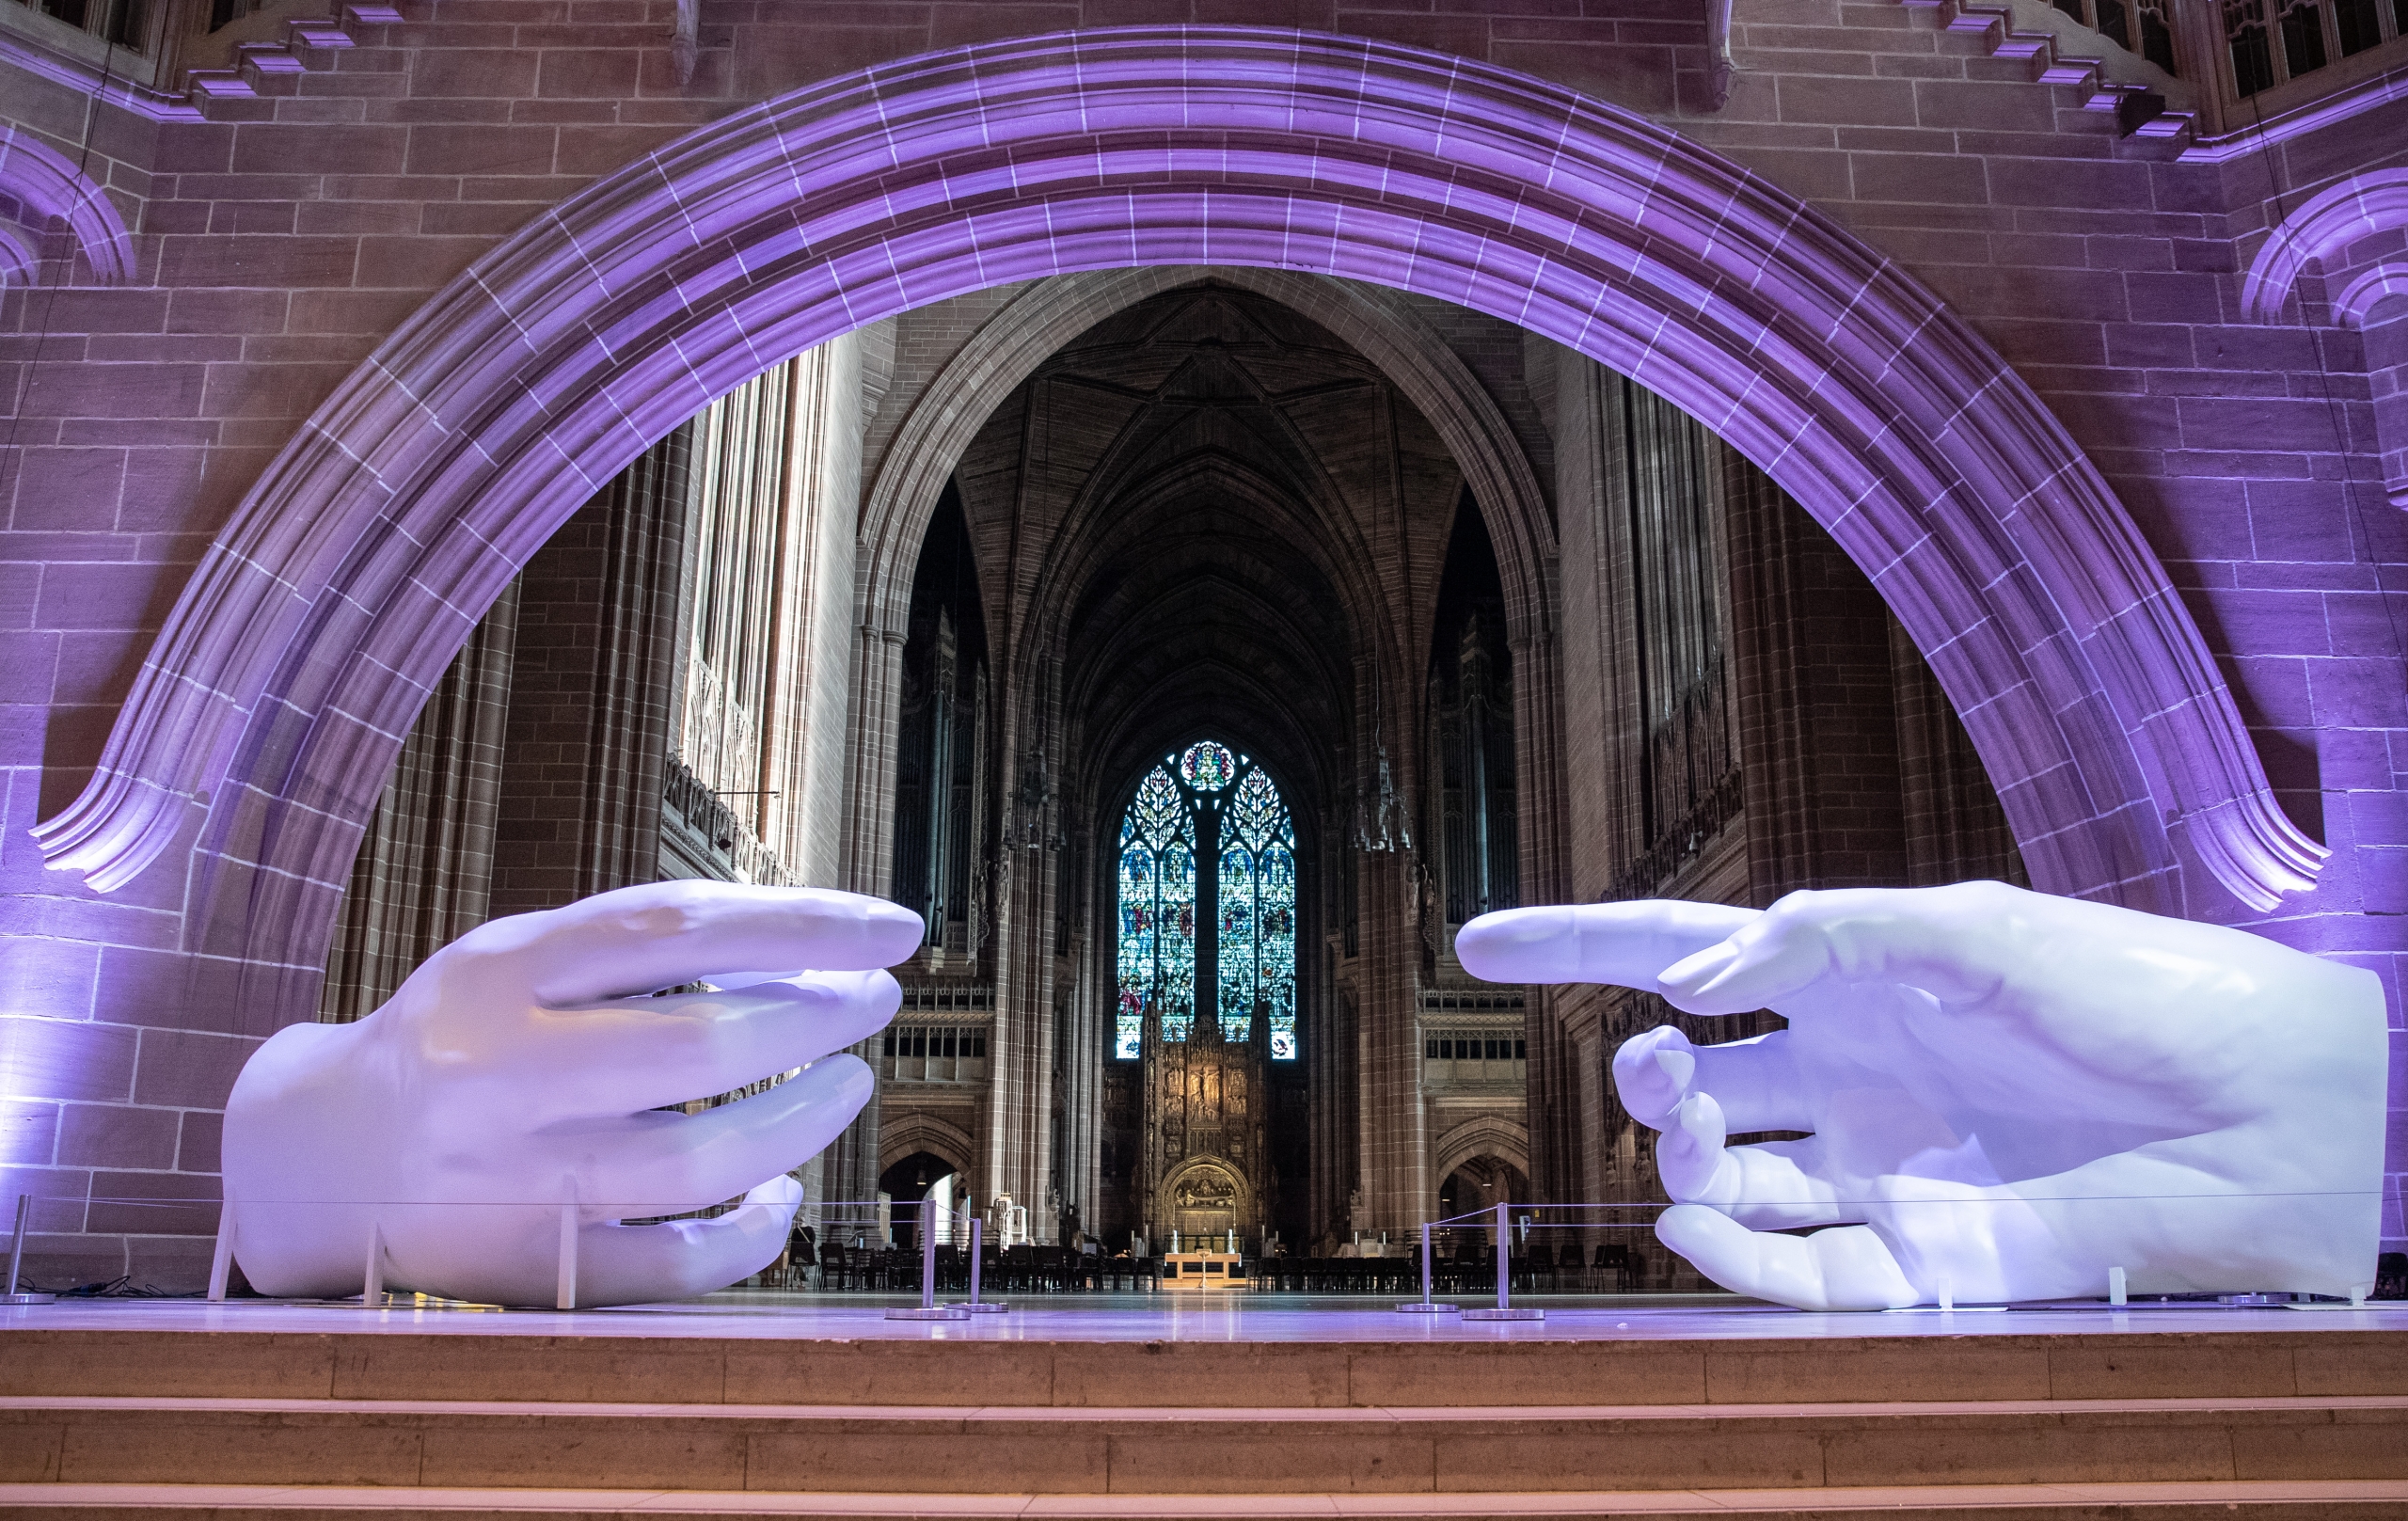 giant hands pointing at each other inside liveprool cathedral